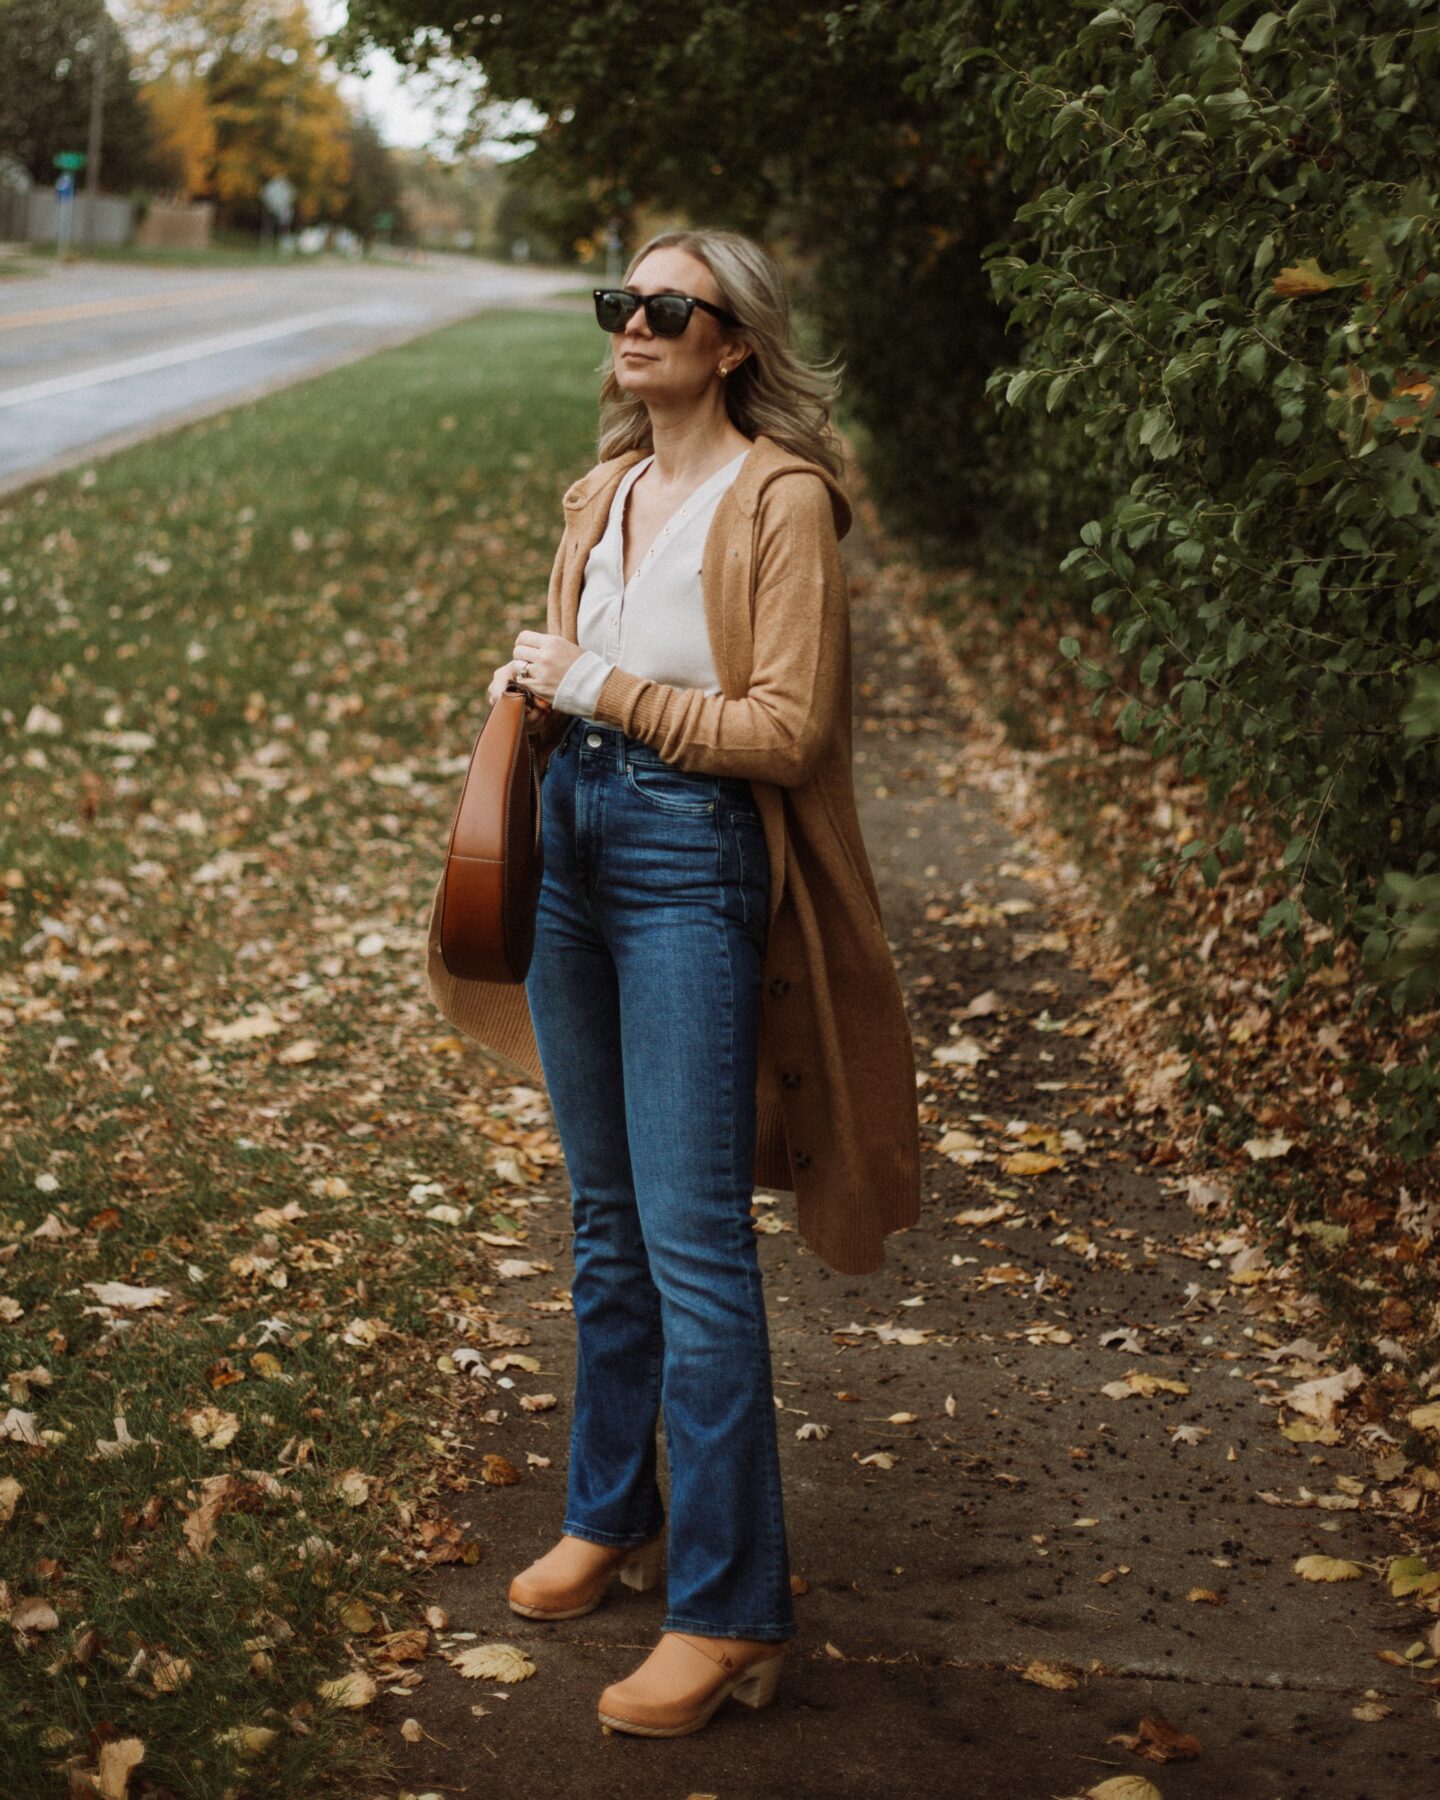 Karin Emily wears the cozy stretch duster from Everlane, a henley tee, and a staud moon bag